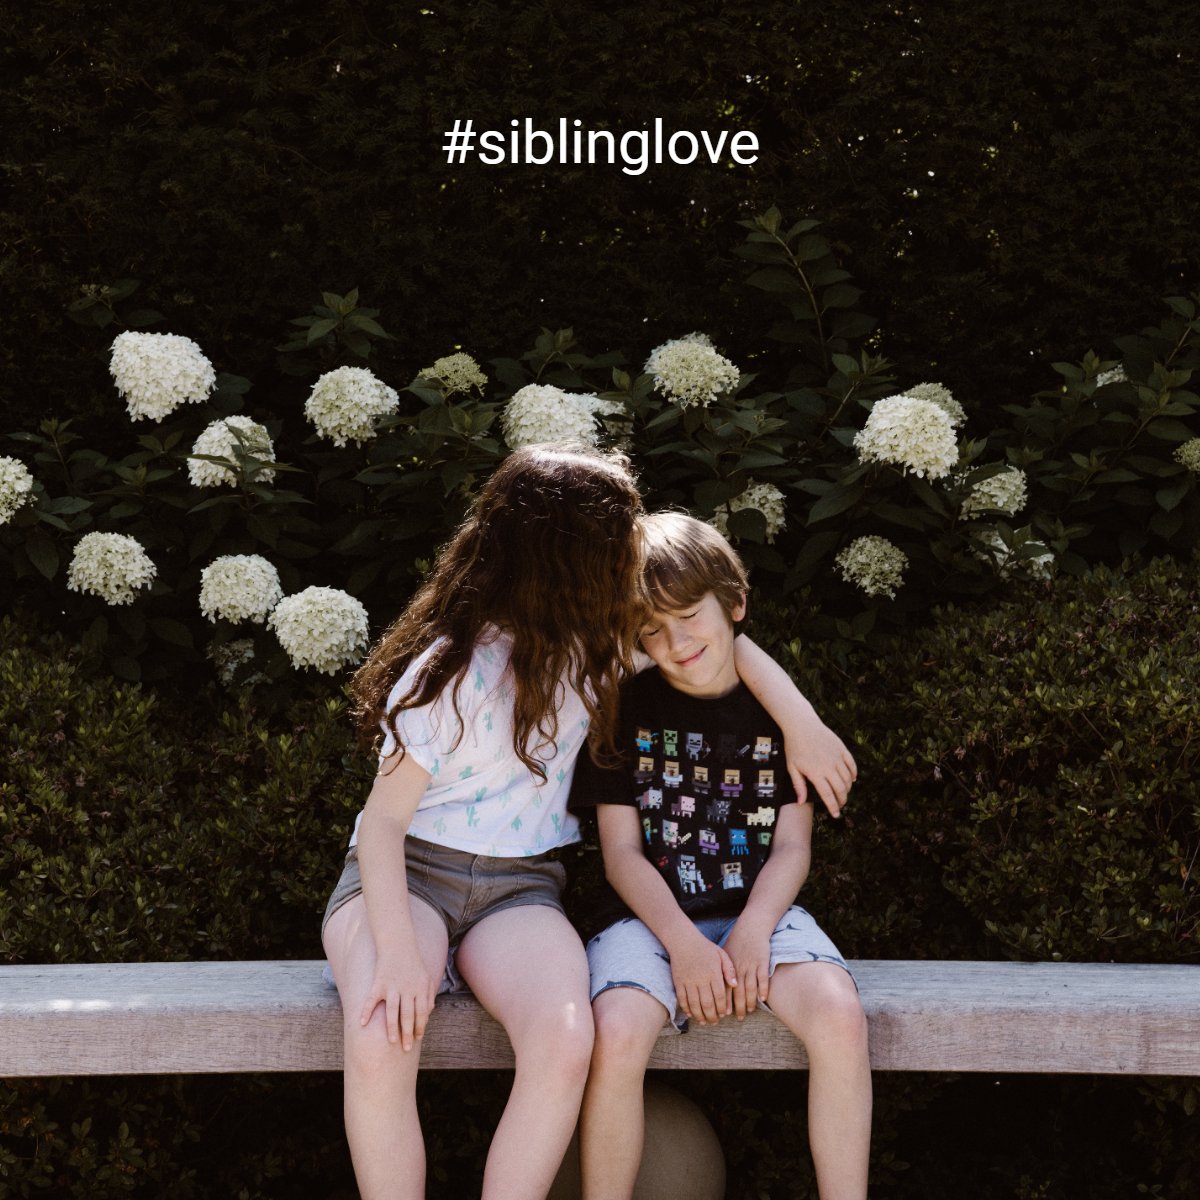 'Nothing beats that sibling love.' 👭❤️👬
― Will Smith 

#quoteoftheday✏️ #quotestagram #siblings
 #RacingRealEstateAgent #BarrettRealEstate #StoneTreeRealEstateTeam #maricopaazrealestate #racingagent #arizonarealestate #phoenixrealestateagent